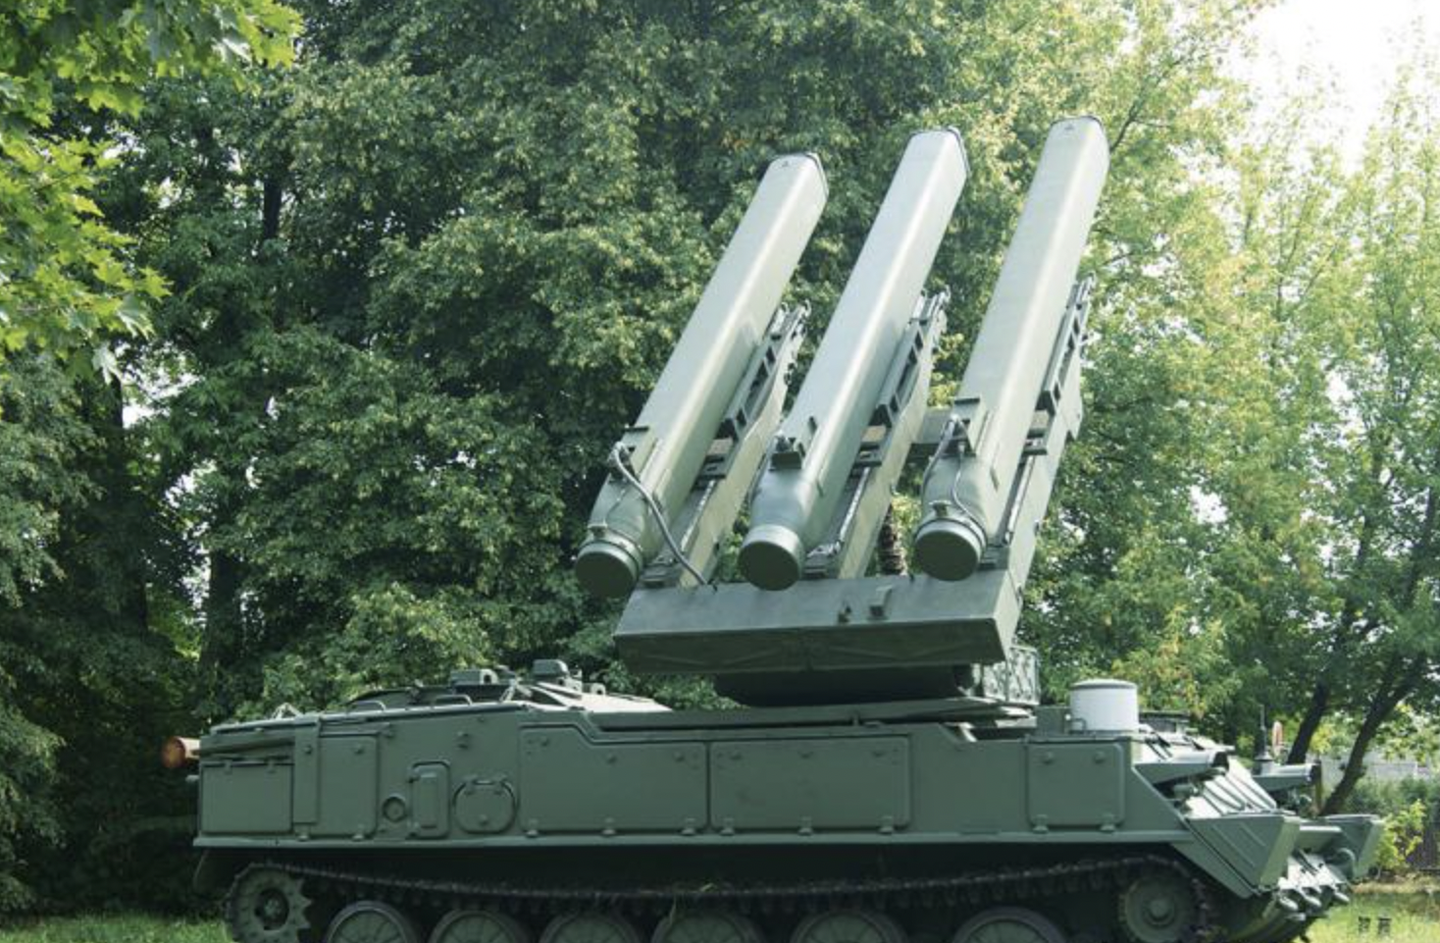 Adaptation of the 2K12 Kub air defense system for RIM-162 ESSM anti-aircraft missiles from the Polish WZU, US Media Told What Purpose Ukraine Need Sea Sparrow Missiles For,Defense Express